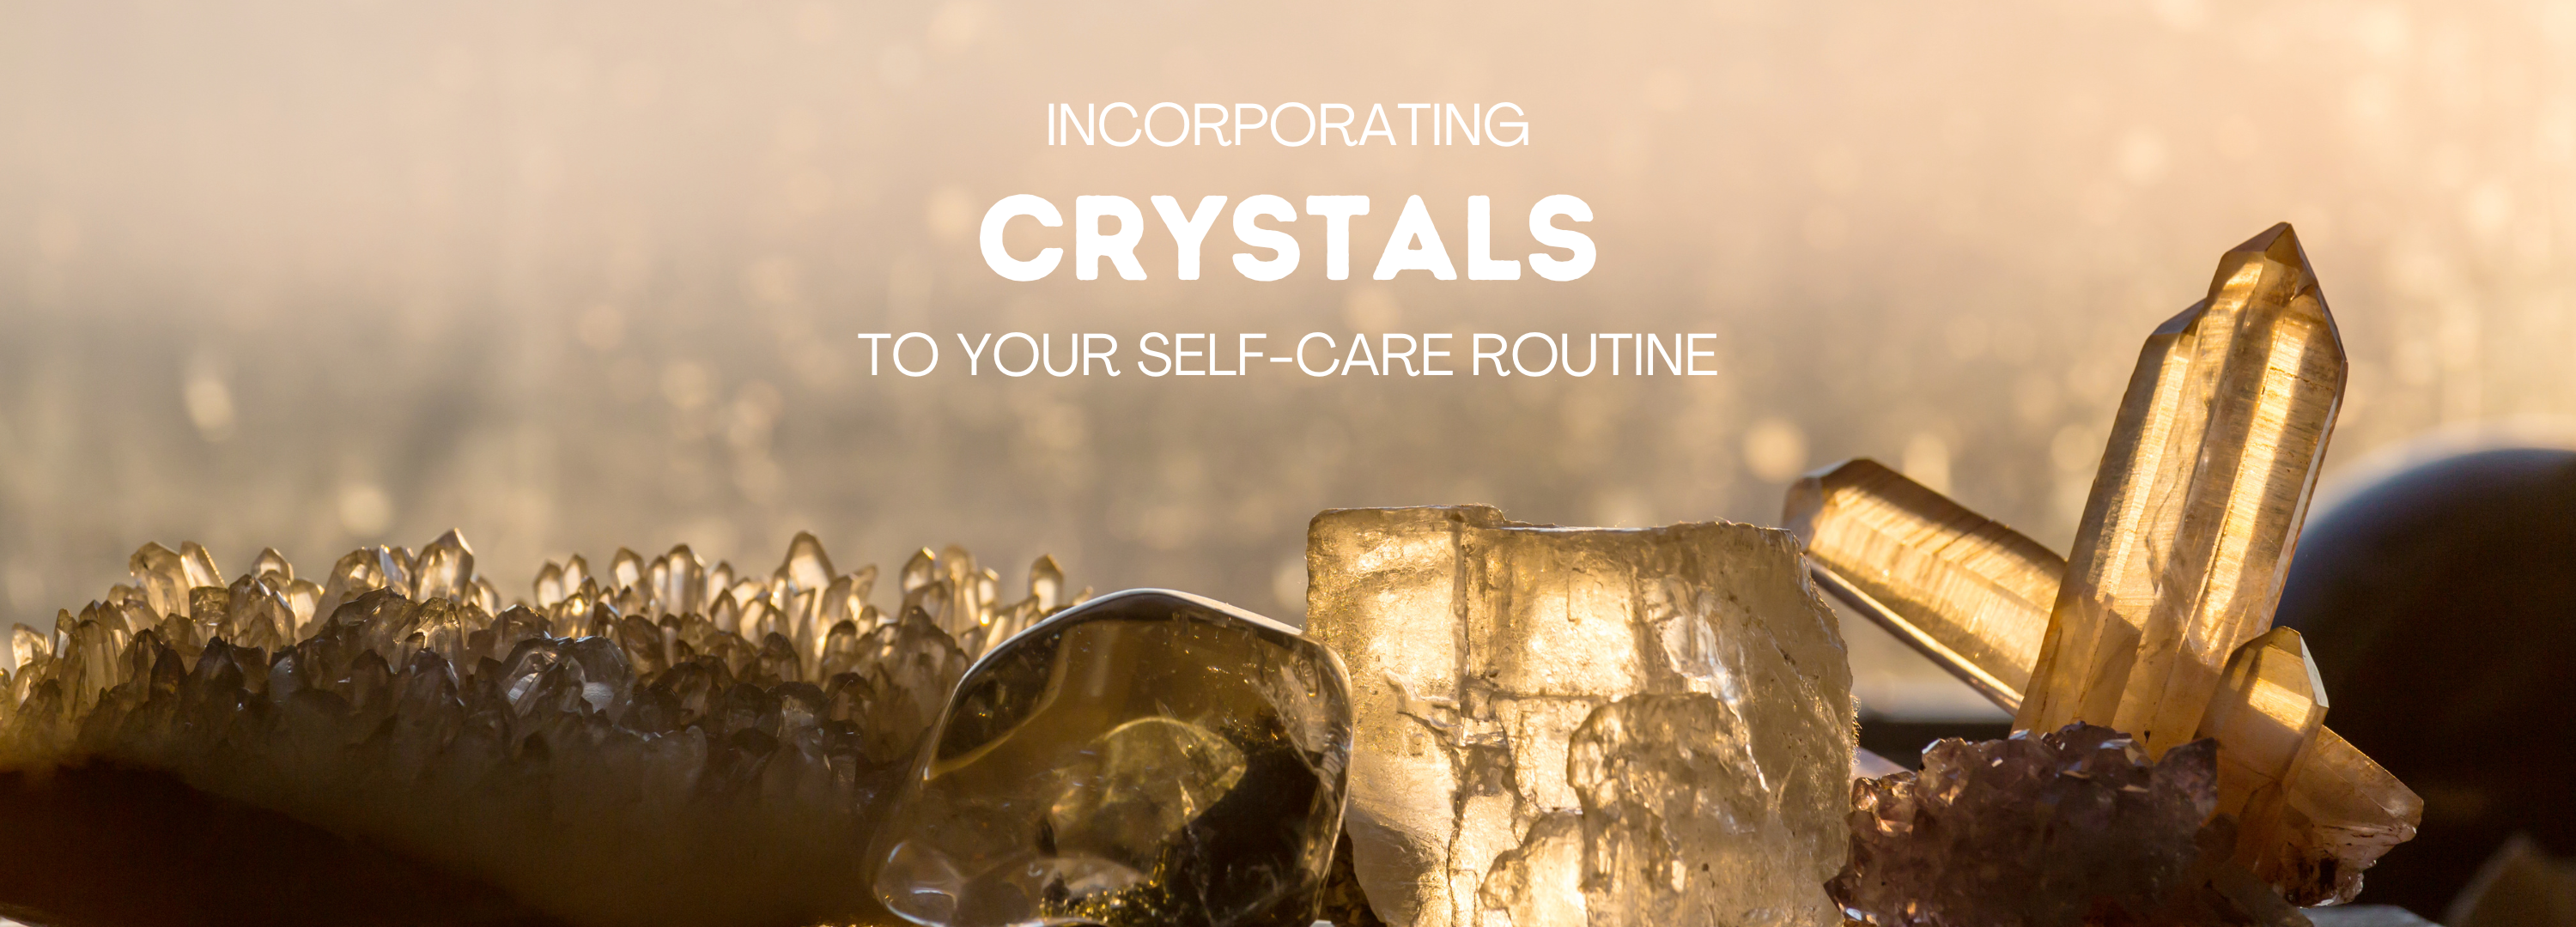 Crystals For Self-Care